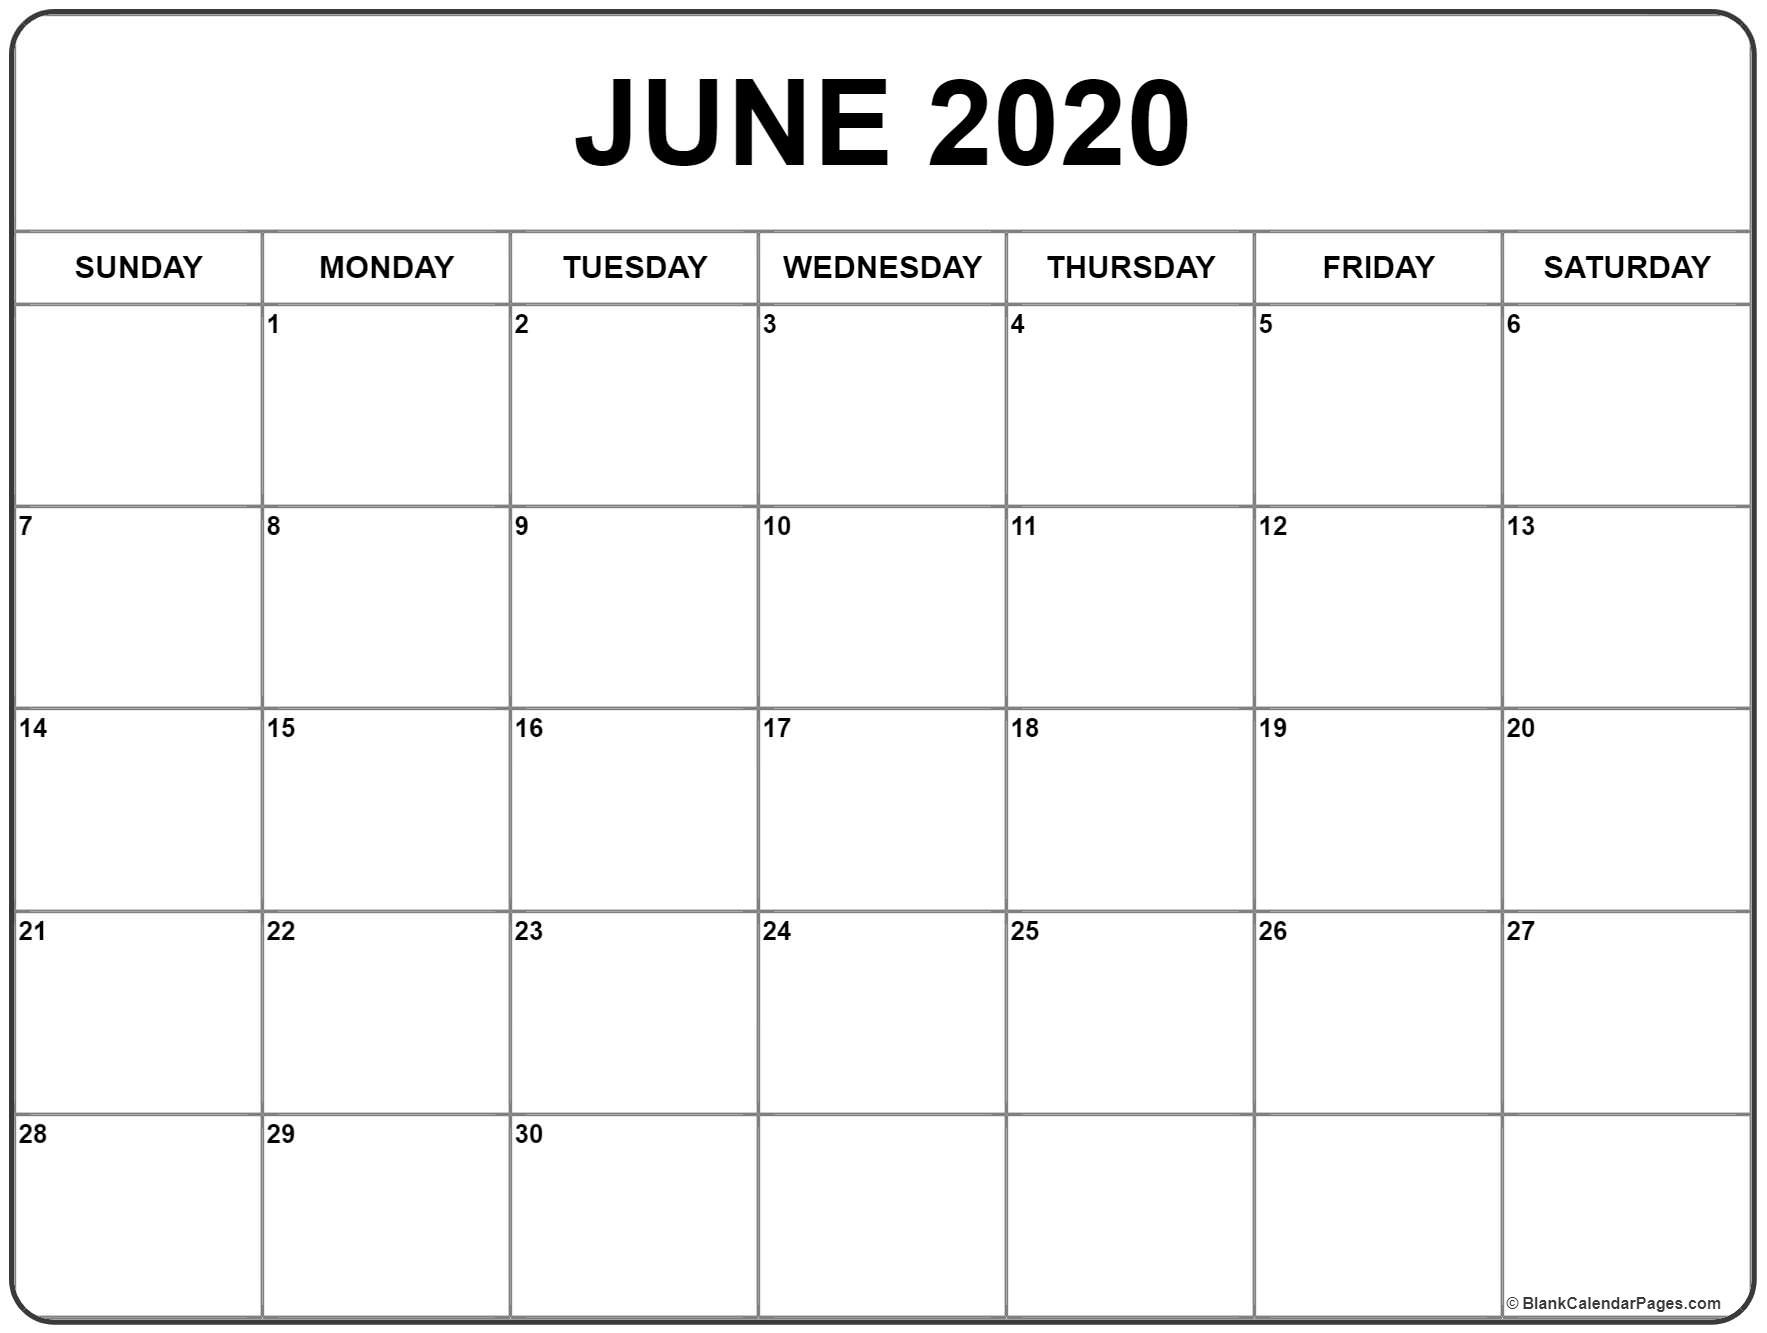 June 2020 Calendar | Free Printable Monthly Calendars-Monthly Calendar Of June And July 2020